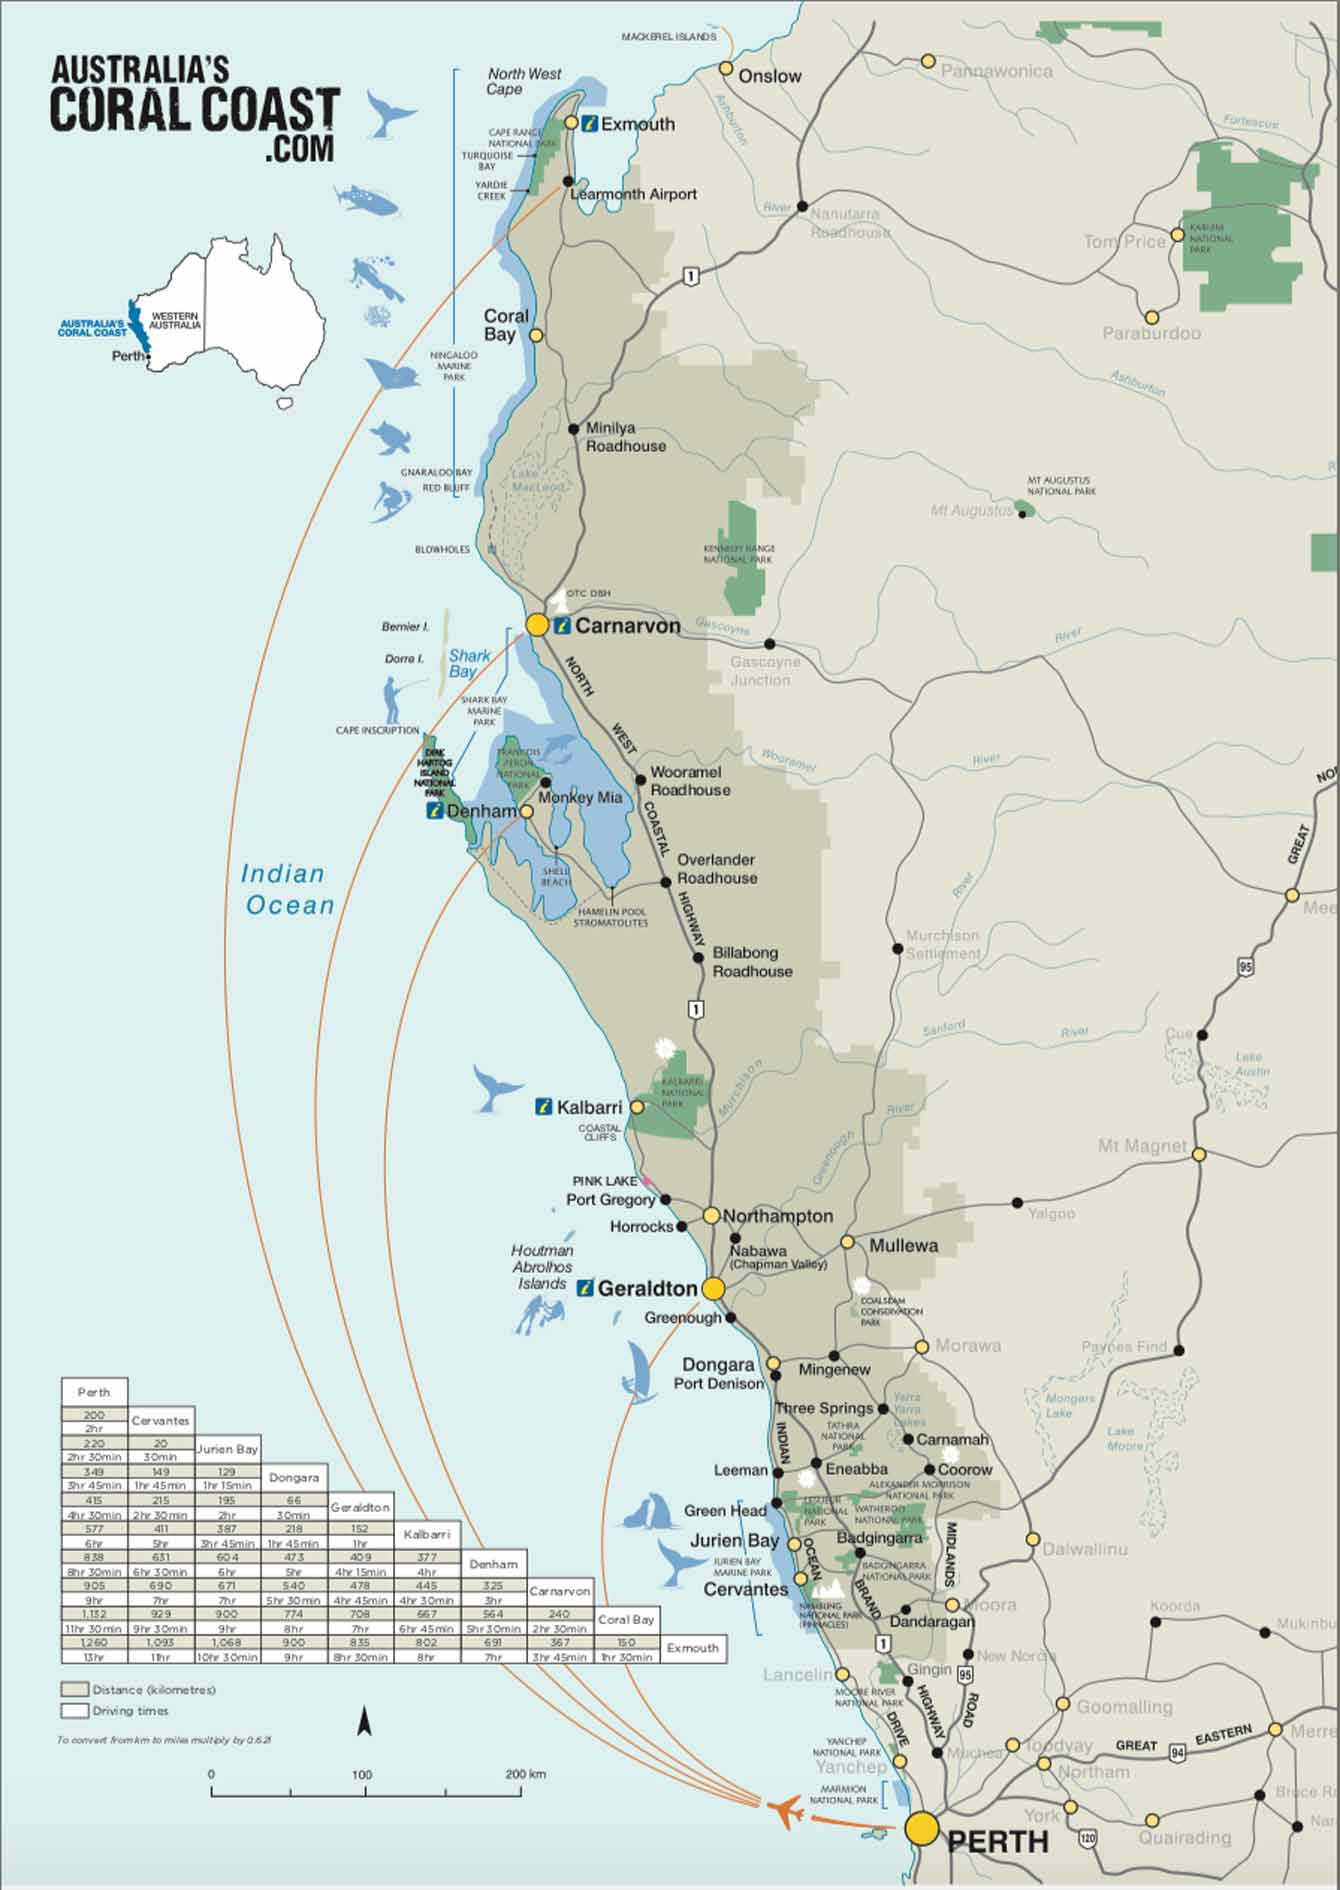 Map of Australia's Coral Coast and travel distances